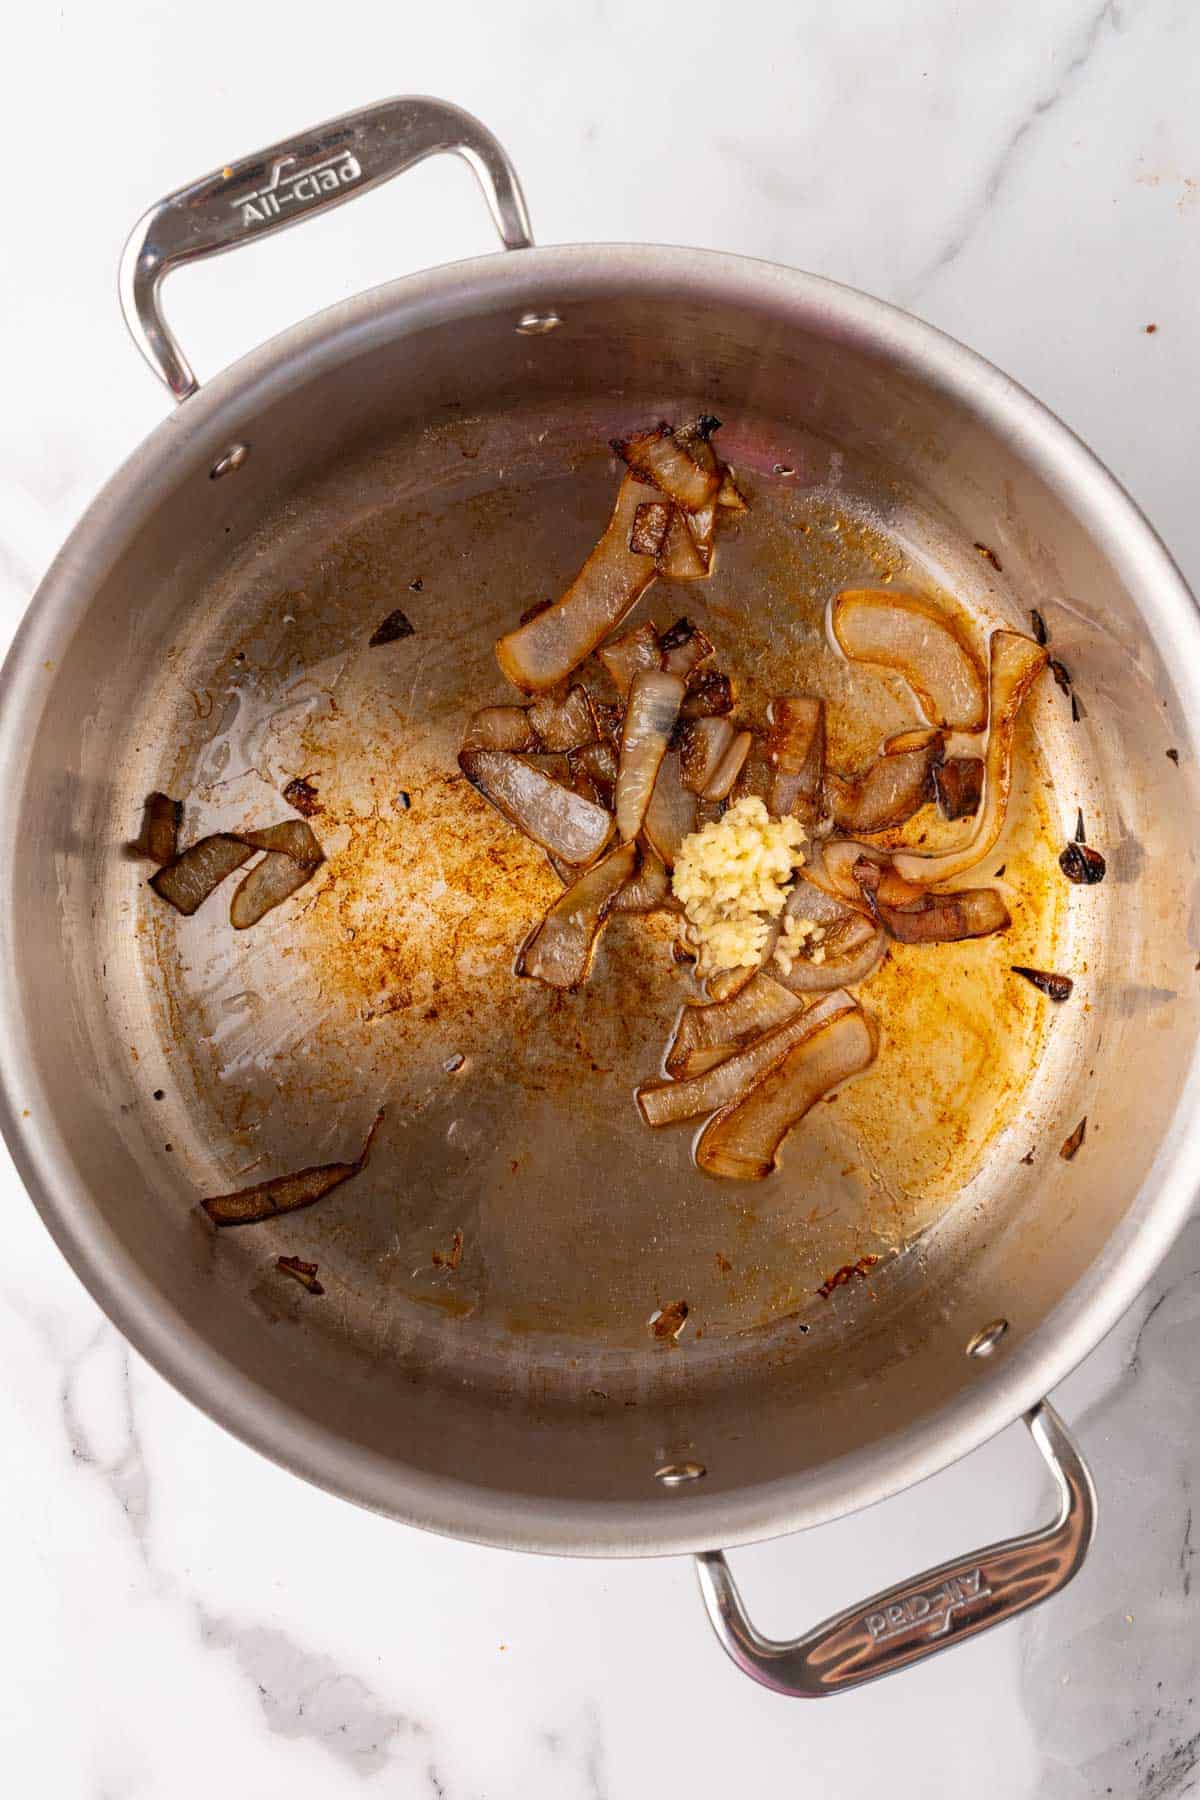 Garlic added to caramelized onions in a silver saucepan, as seen from above on a white marble countertop